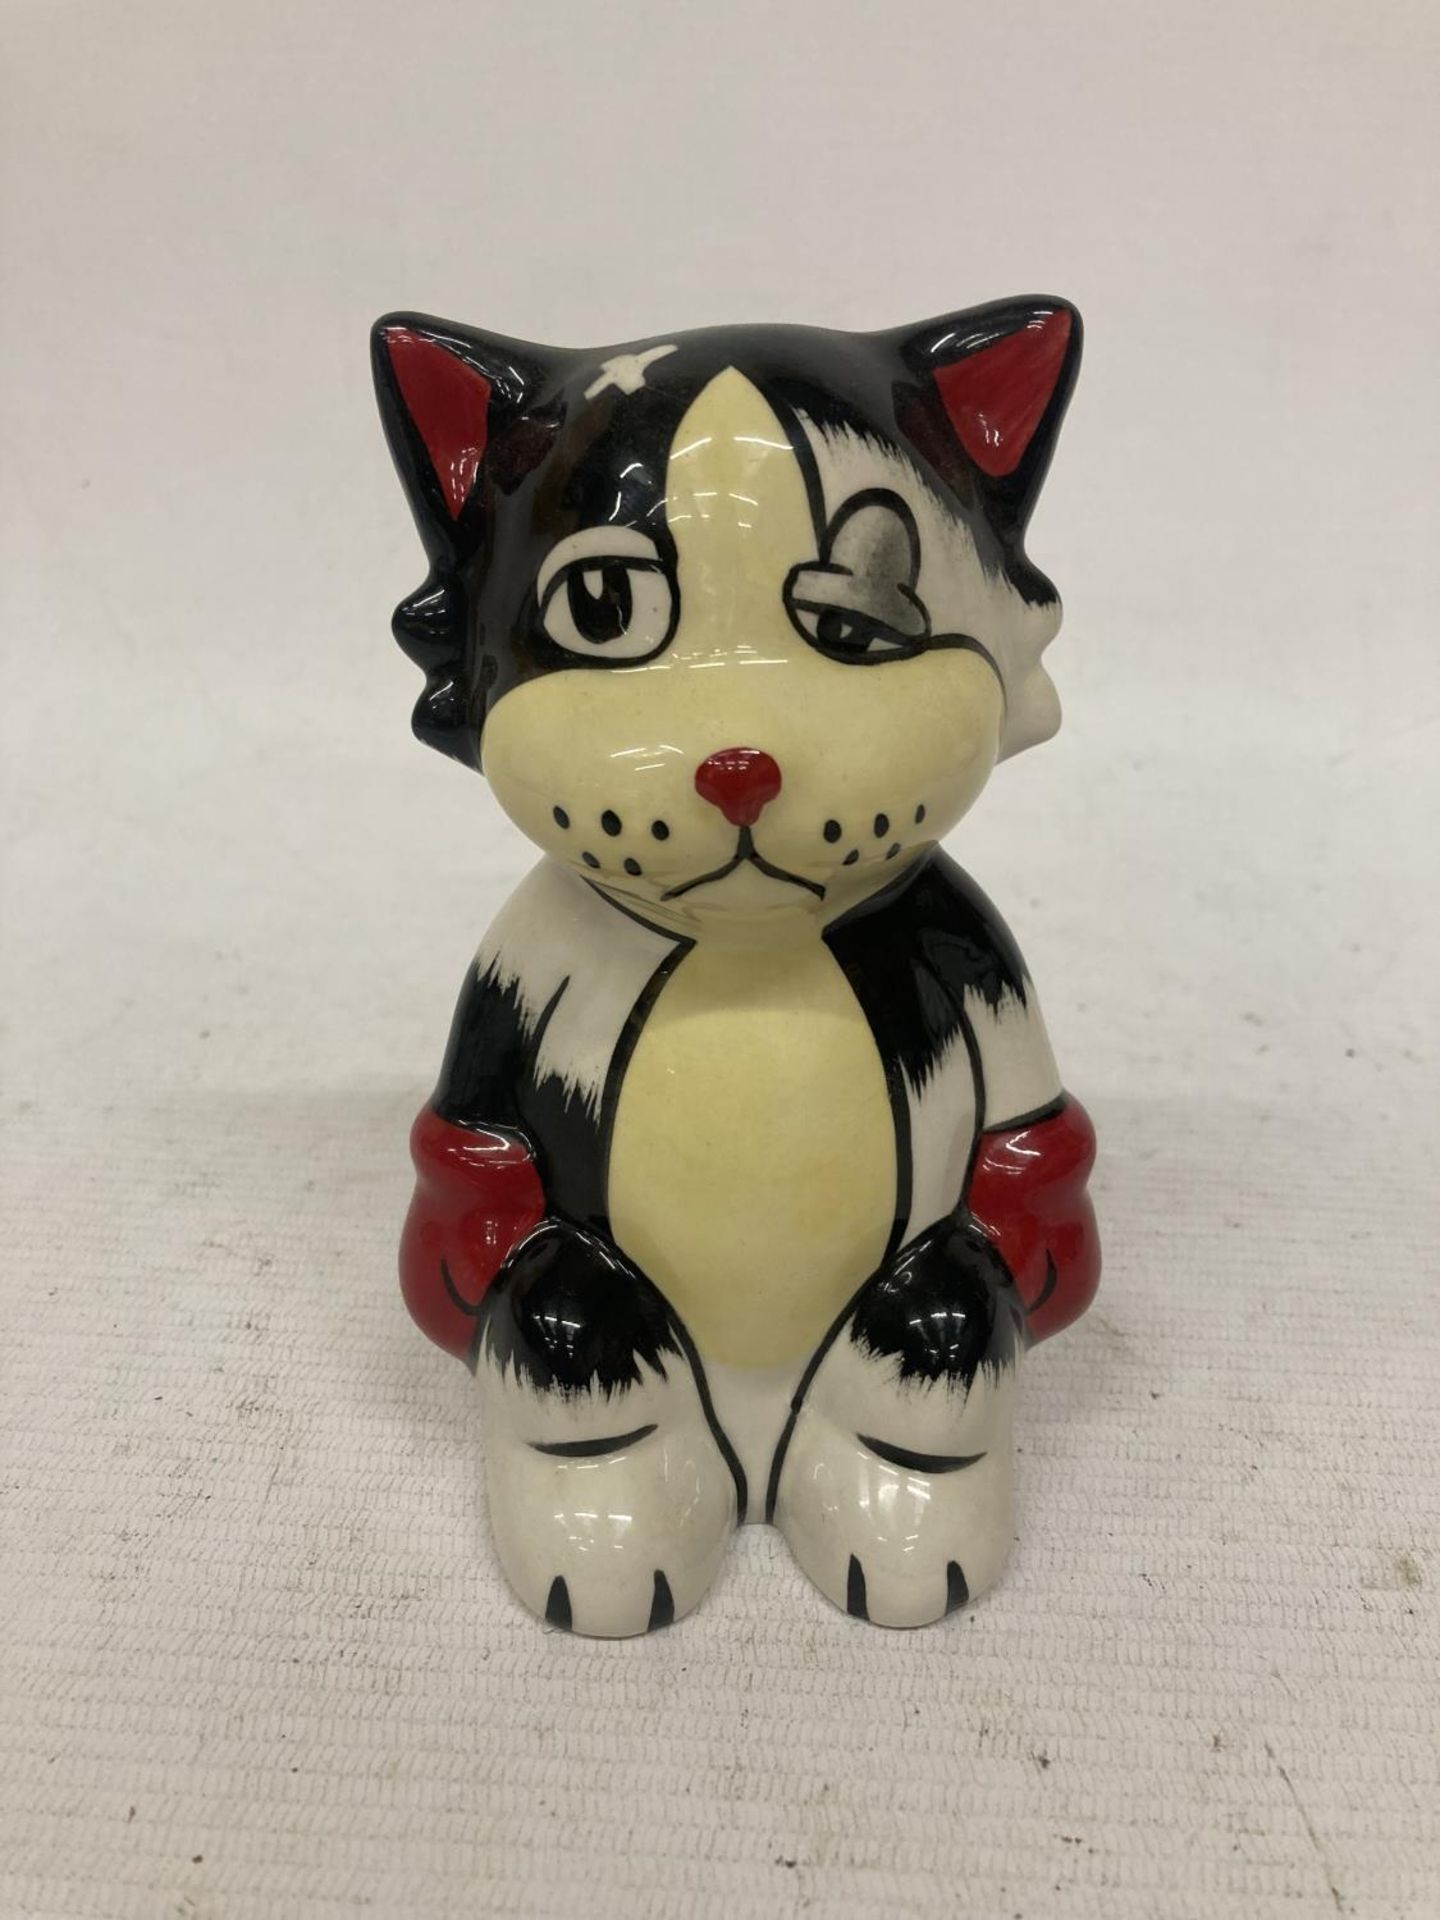 A LORNA BAILEY " ALI BOXER" CAT HANDPAINTED AND SIGNED